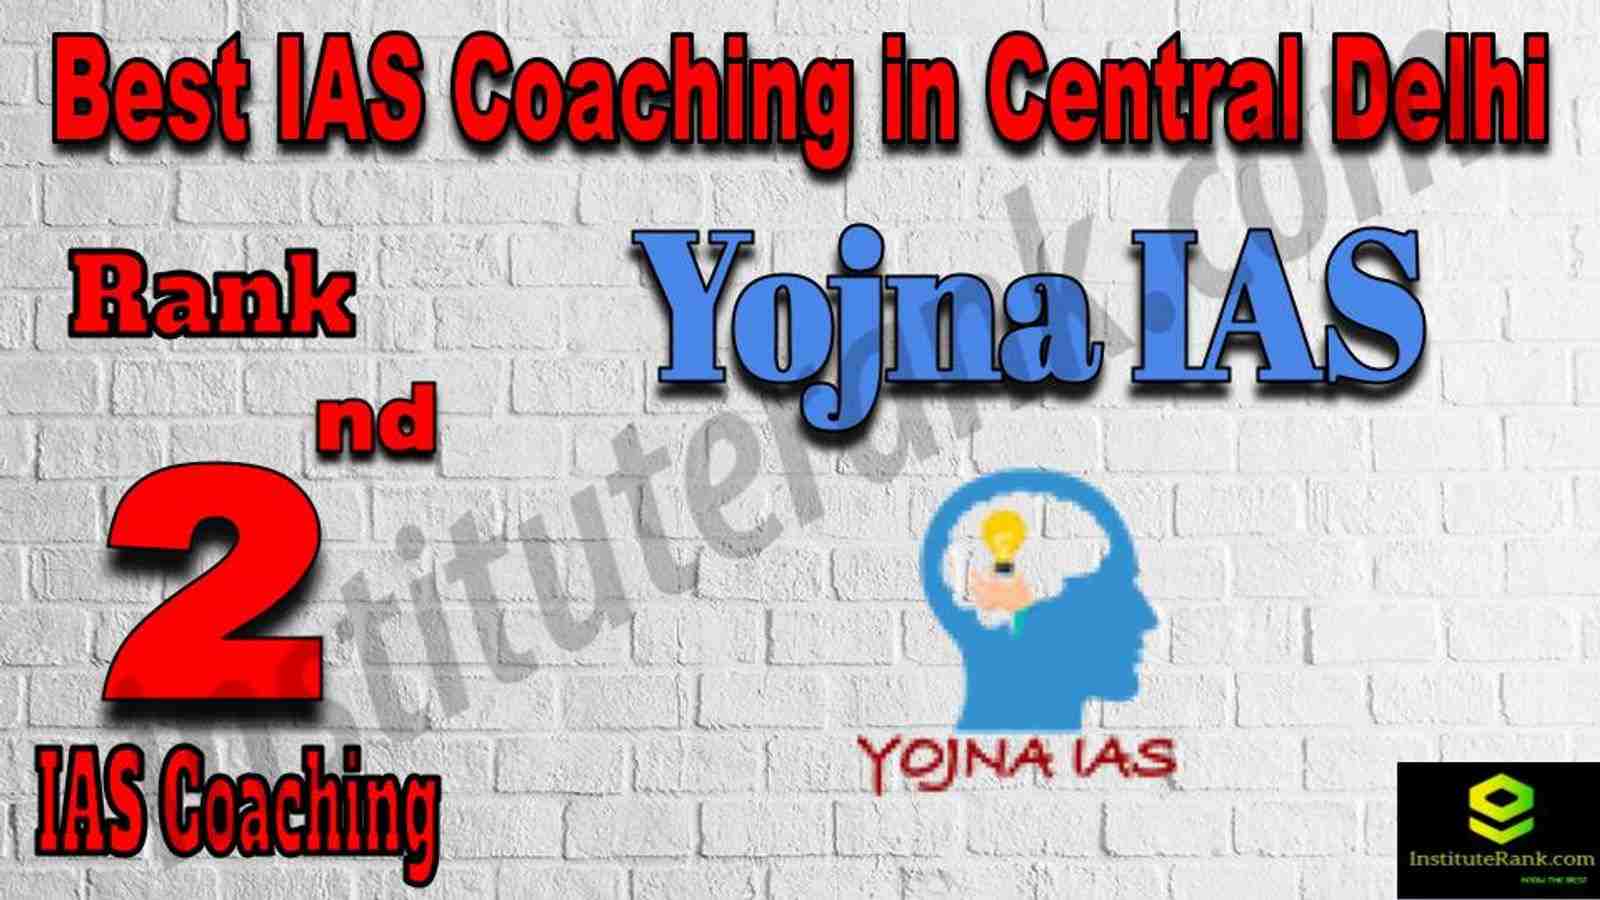 2nd Best IAS Coaching in Central Delhi